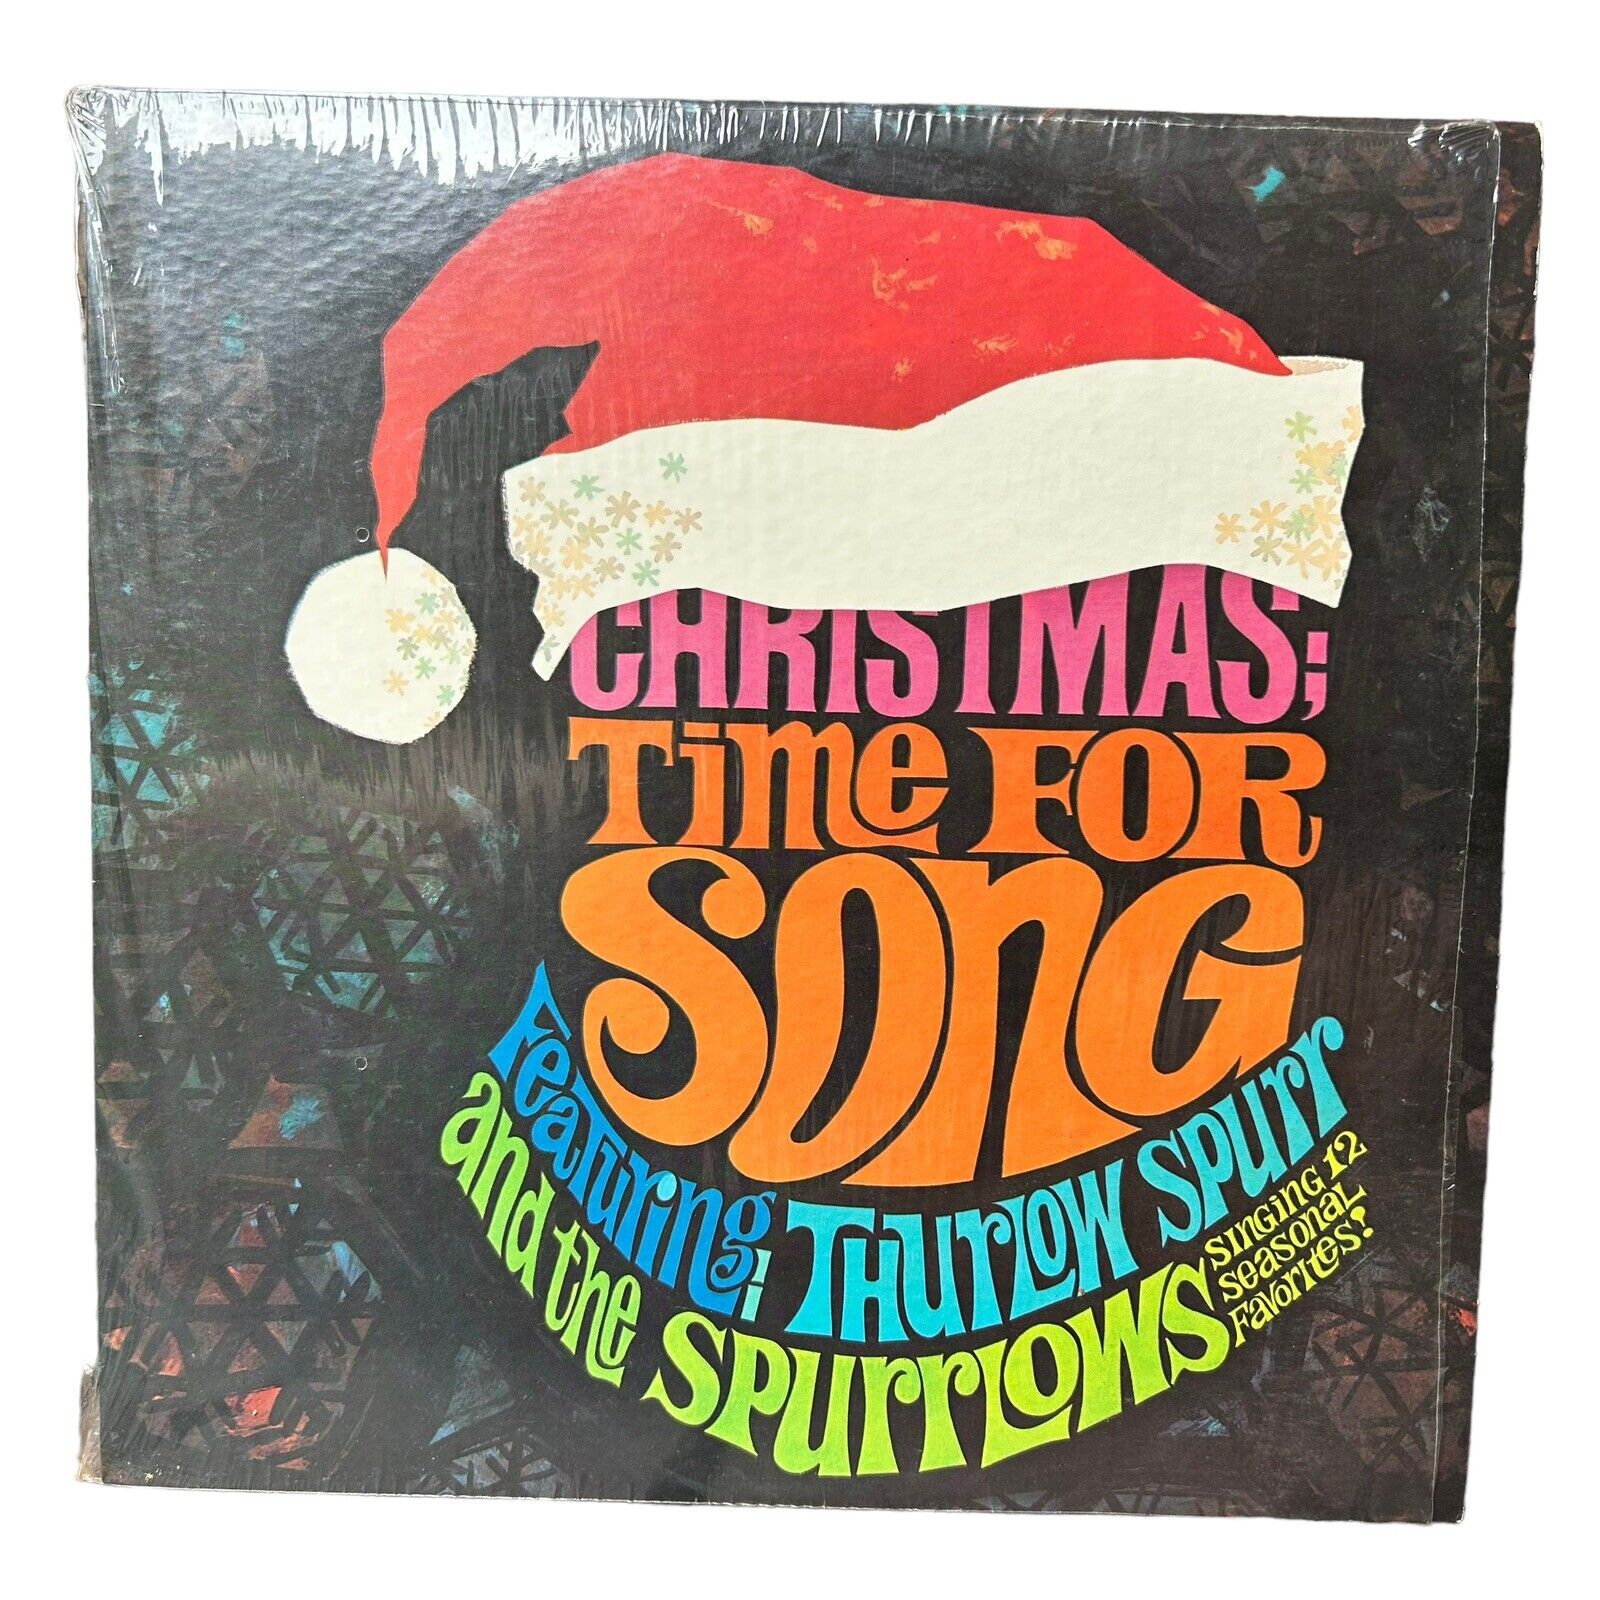 Thurlow Spurr And The Spurrlows - Christmas; Time For Song (NM) Vinyl Record LP